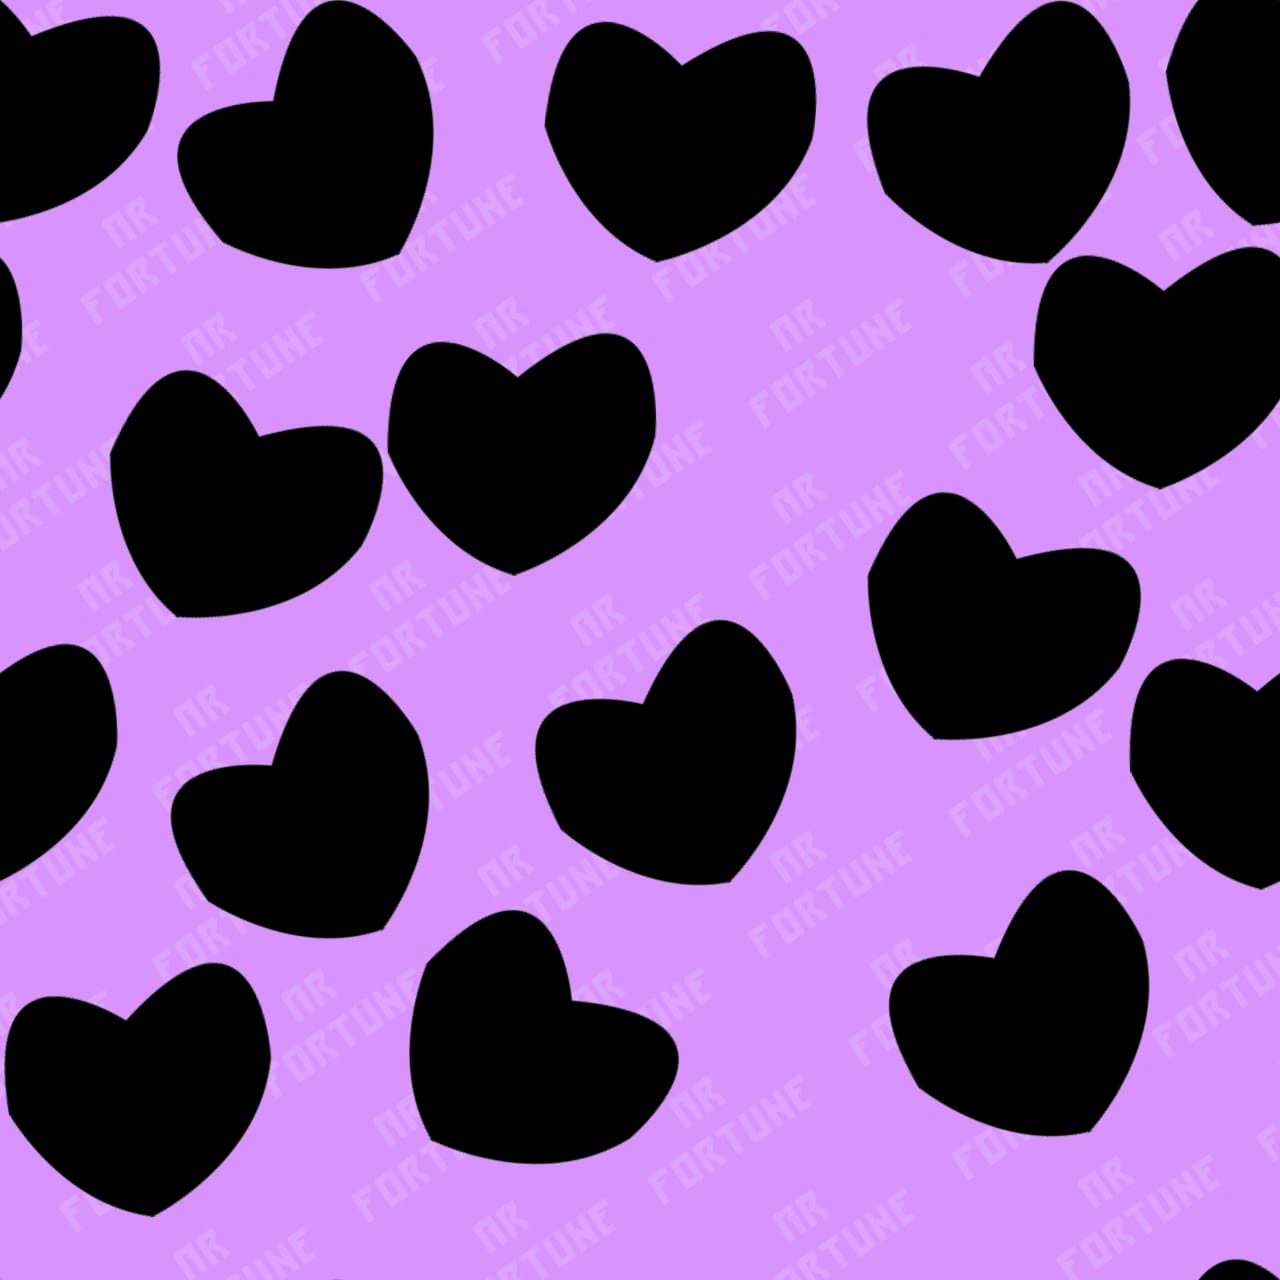 Pattern of black hearts on a purple background.